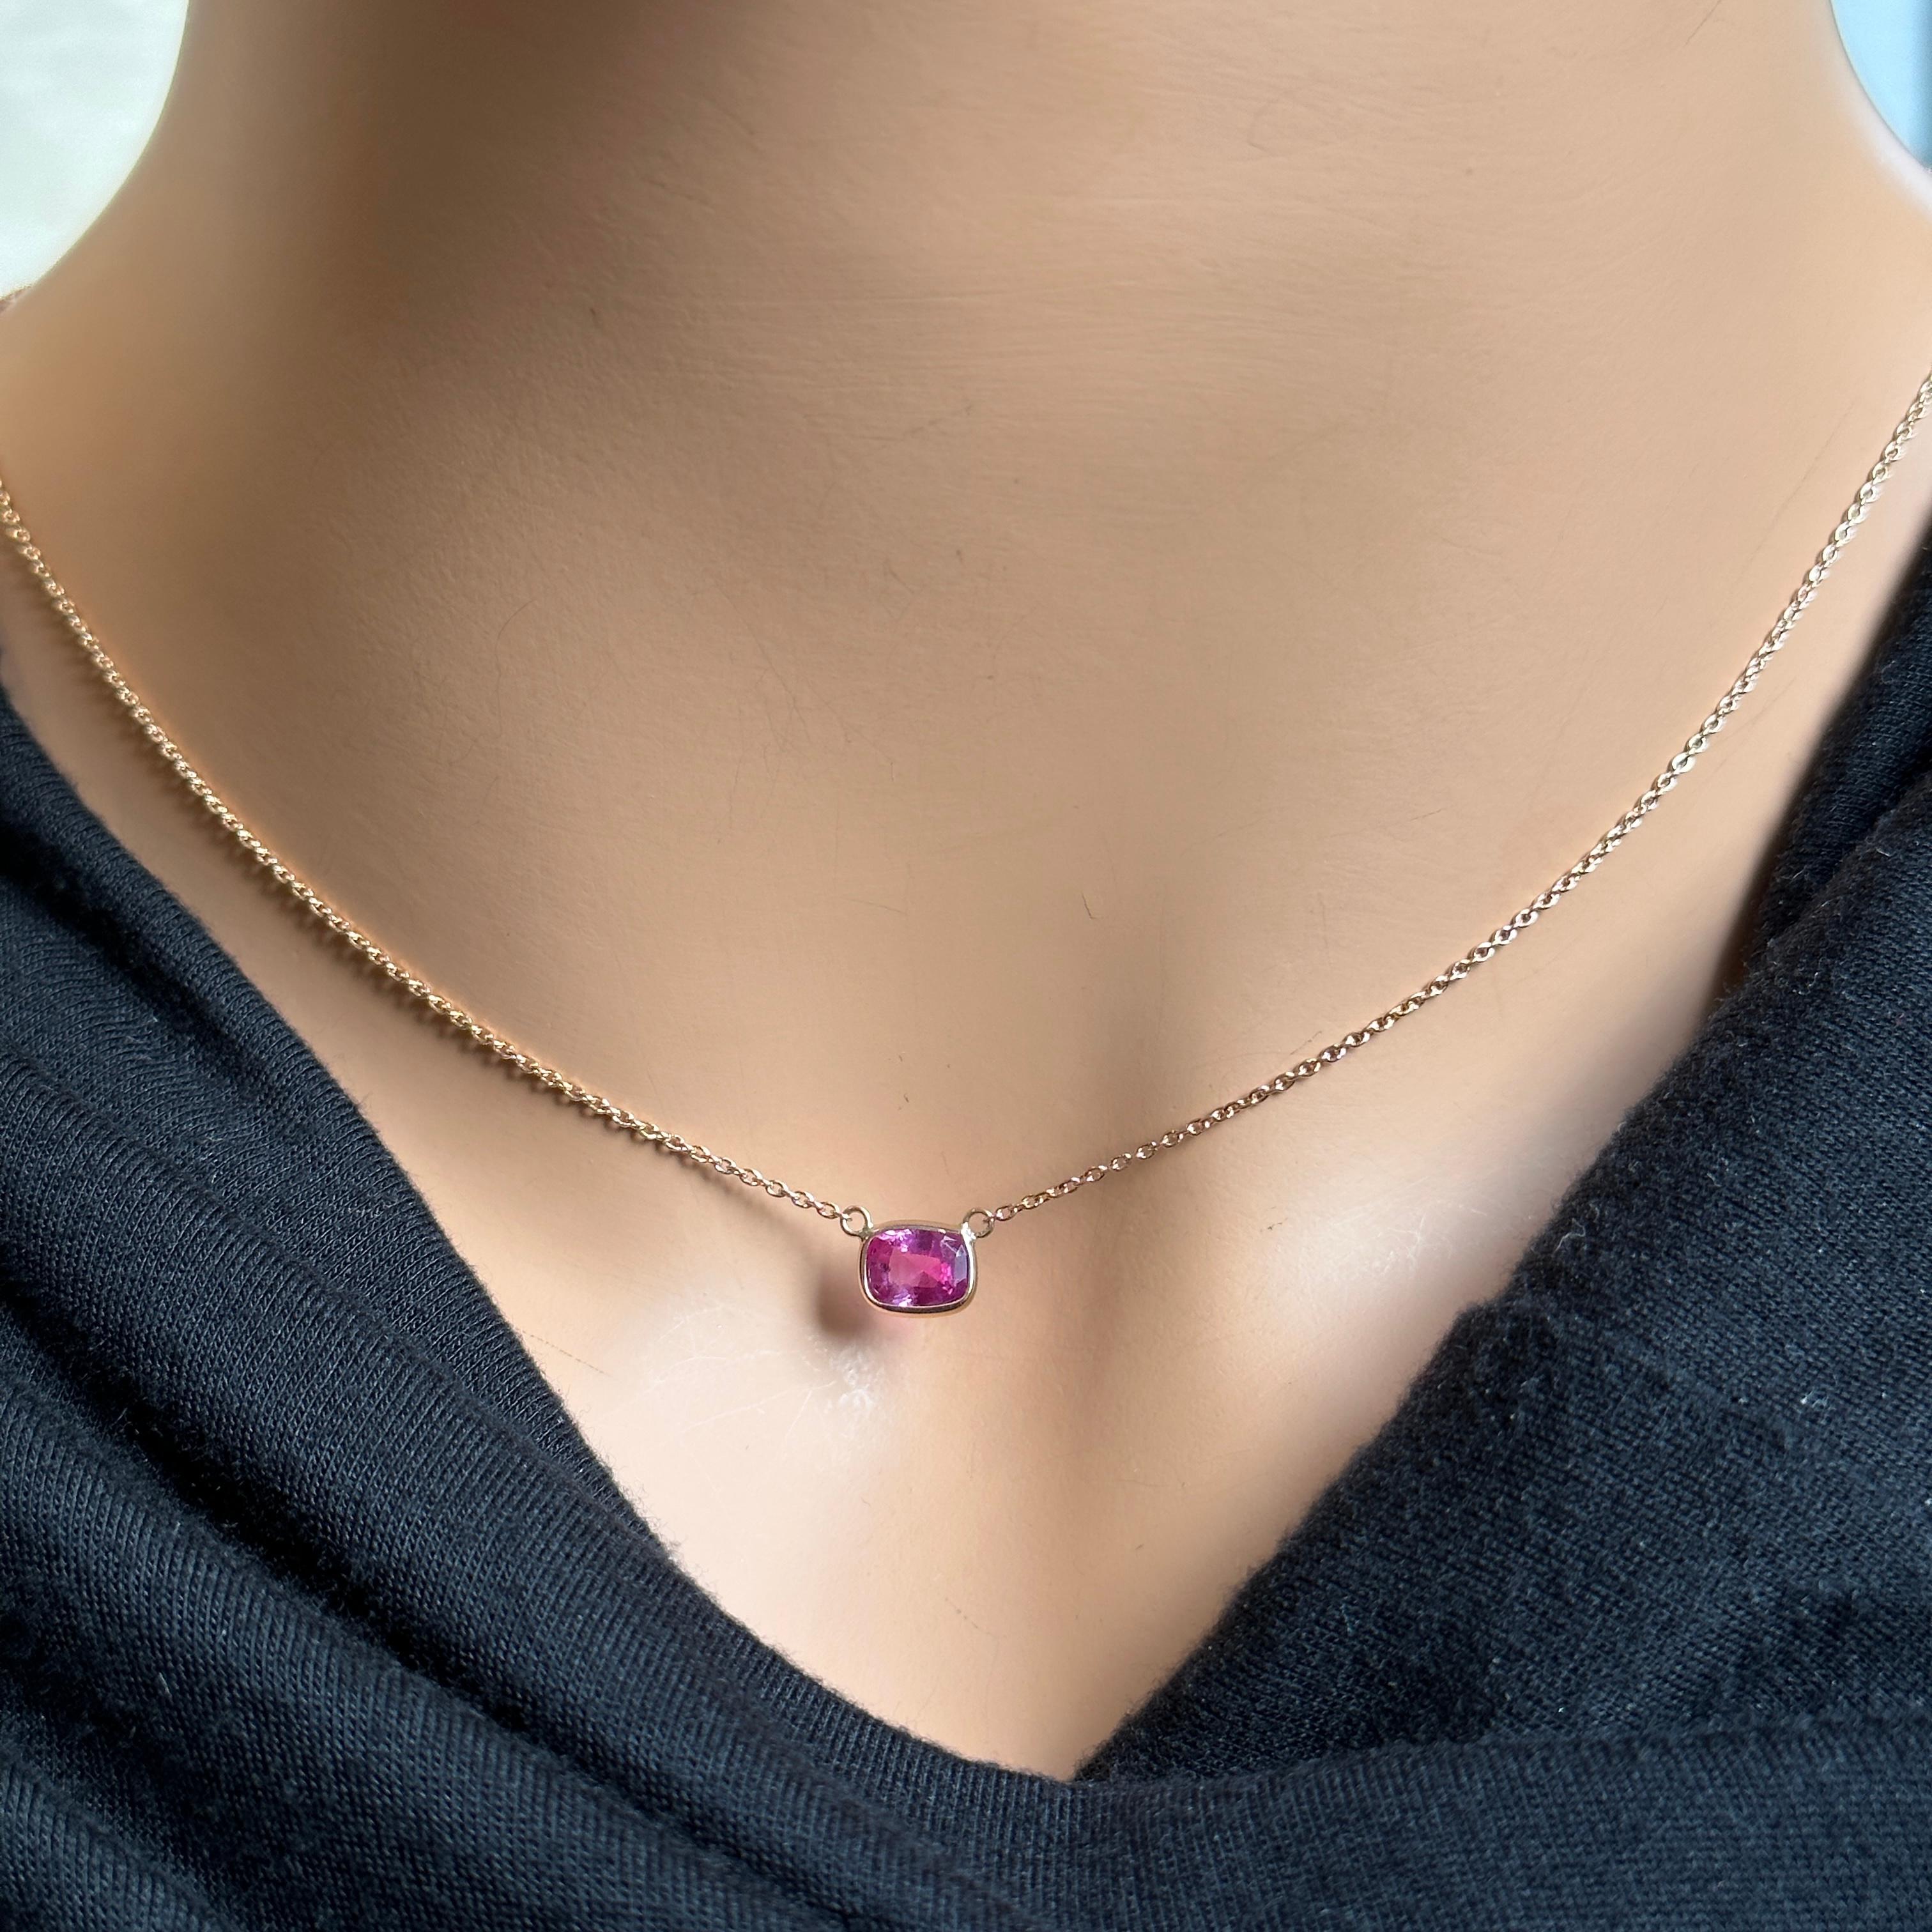 A fashion necklace made of 14k rose gold with a main stone of a certified pink cushion-cut sapphire weighing 1.03 carats would be a stunning and feminine choice. Pink sapphires are known for their delicate and romantic color, and the cushion cut